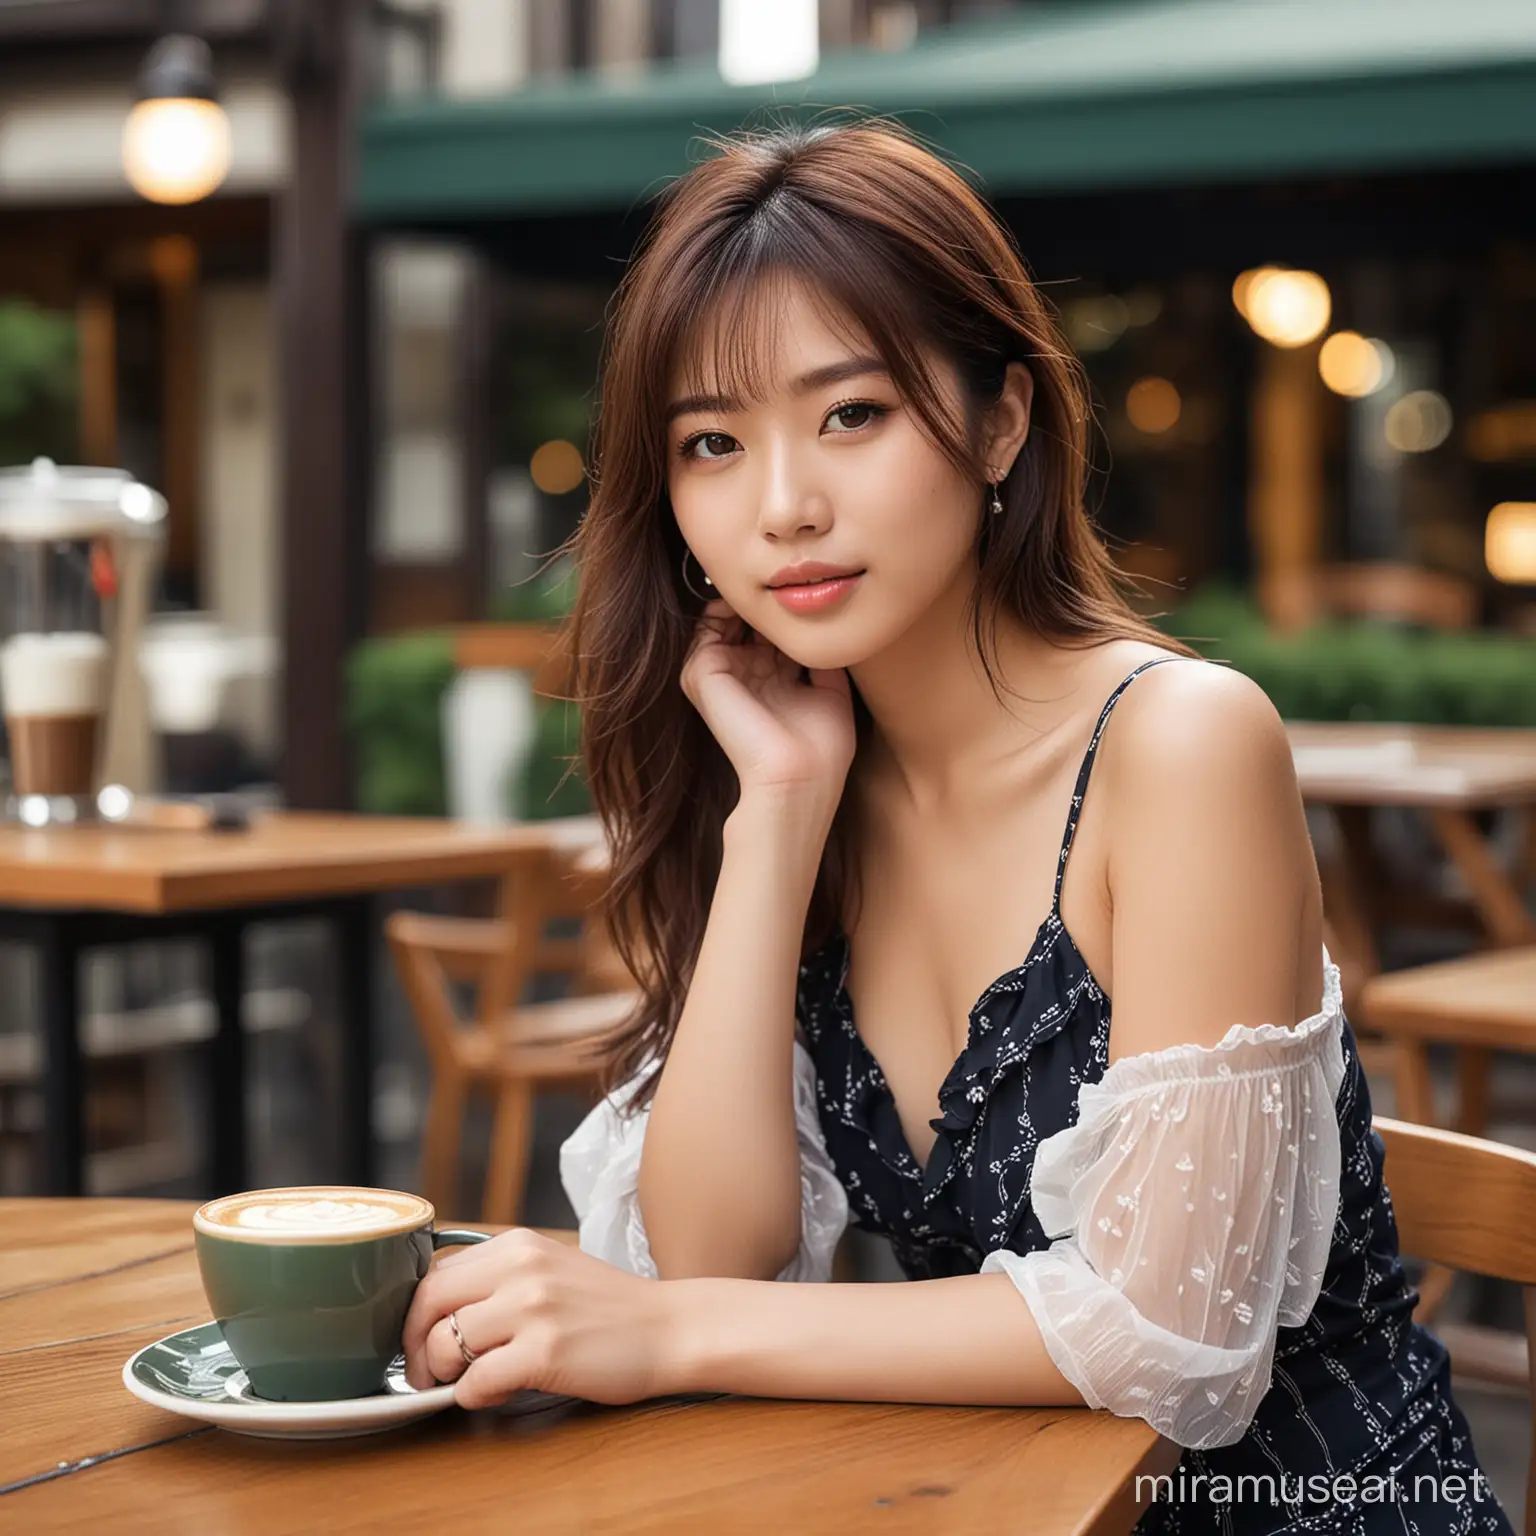 beautiful japanese model girl, sexy style, sitting outdoor of coffee shop, Leica 50 mm lens bokeh, Fine image, high resolution